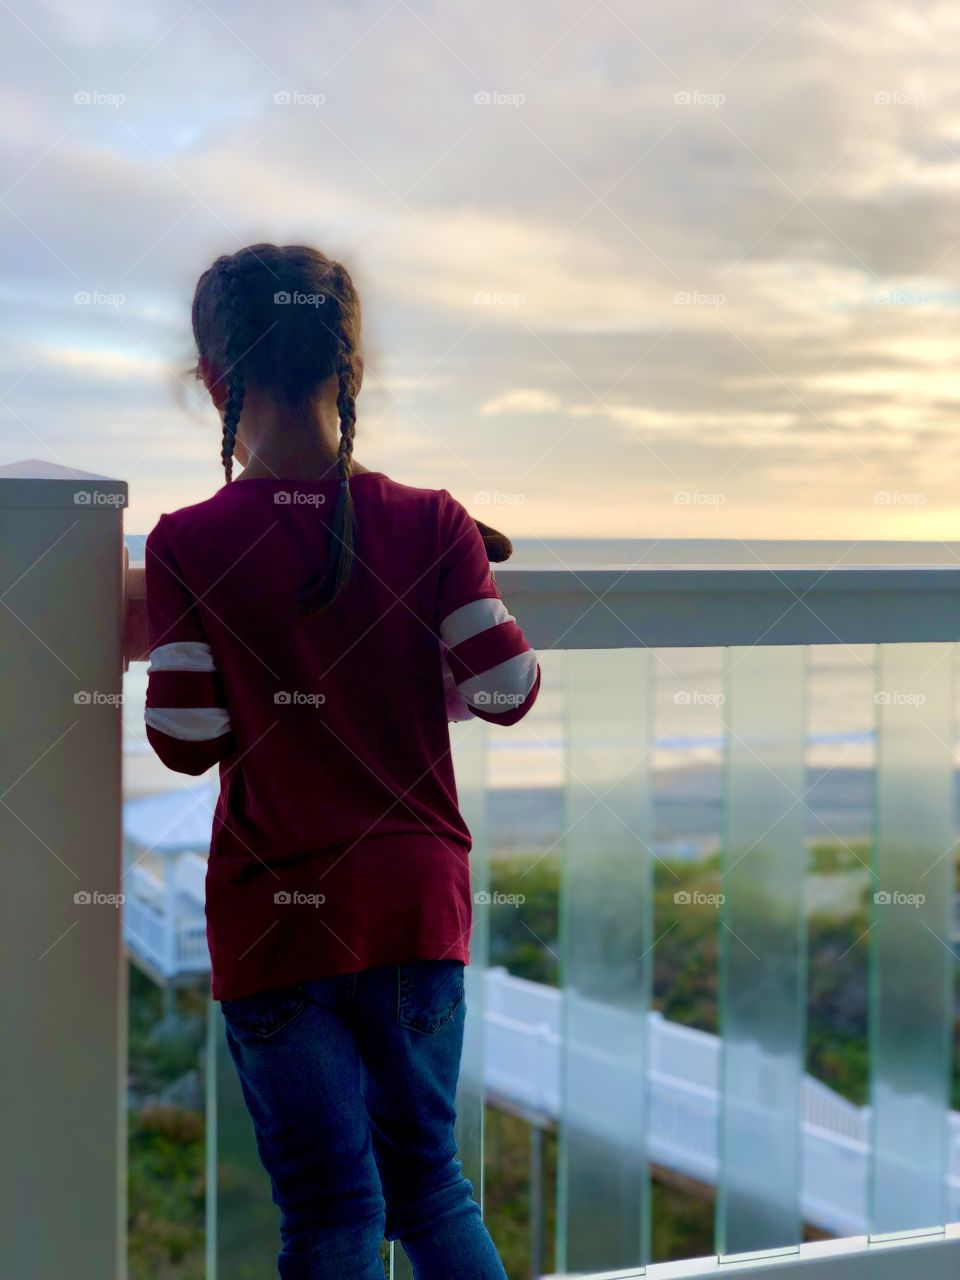 Child looking into the ocean shore from an oceanfront view